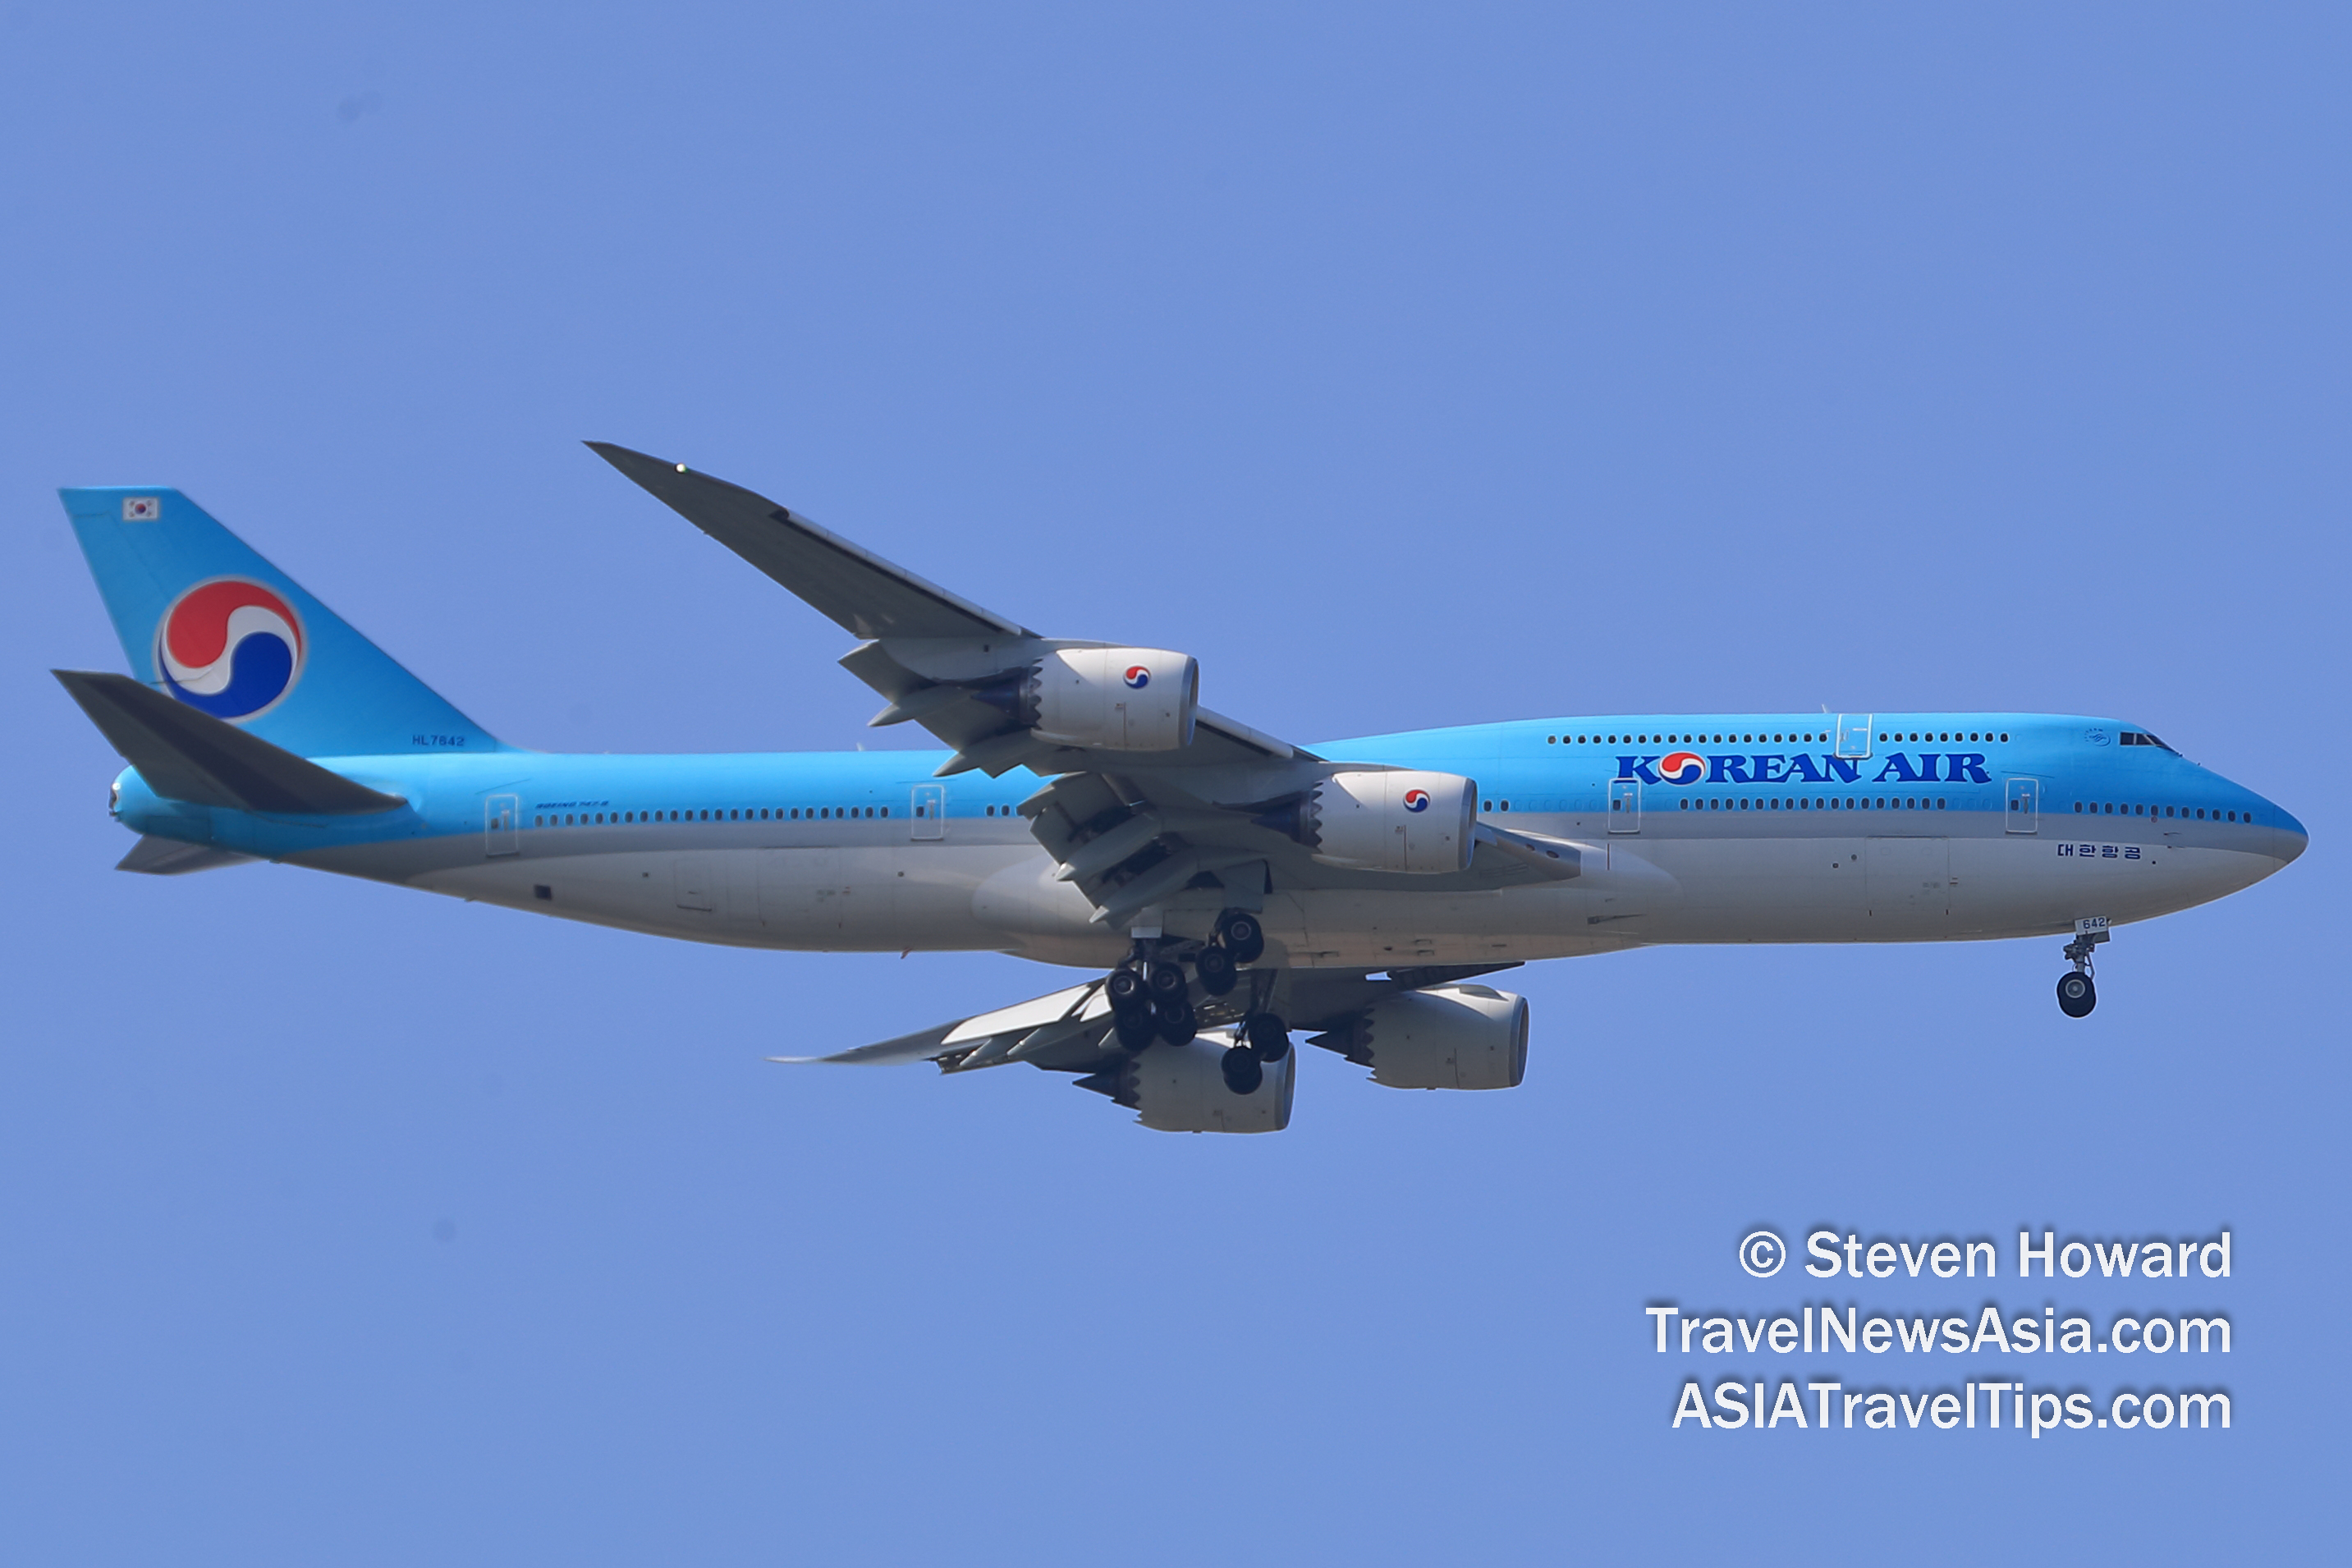 Korean Air Boeing 747-8 reg: HL-7642. Picture by Steven Howard of TravelNewsAsia.com Click to enlarge.